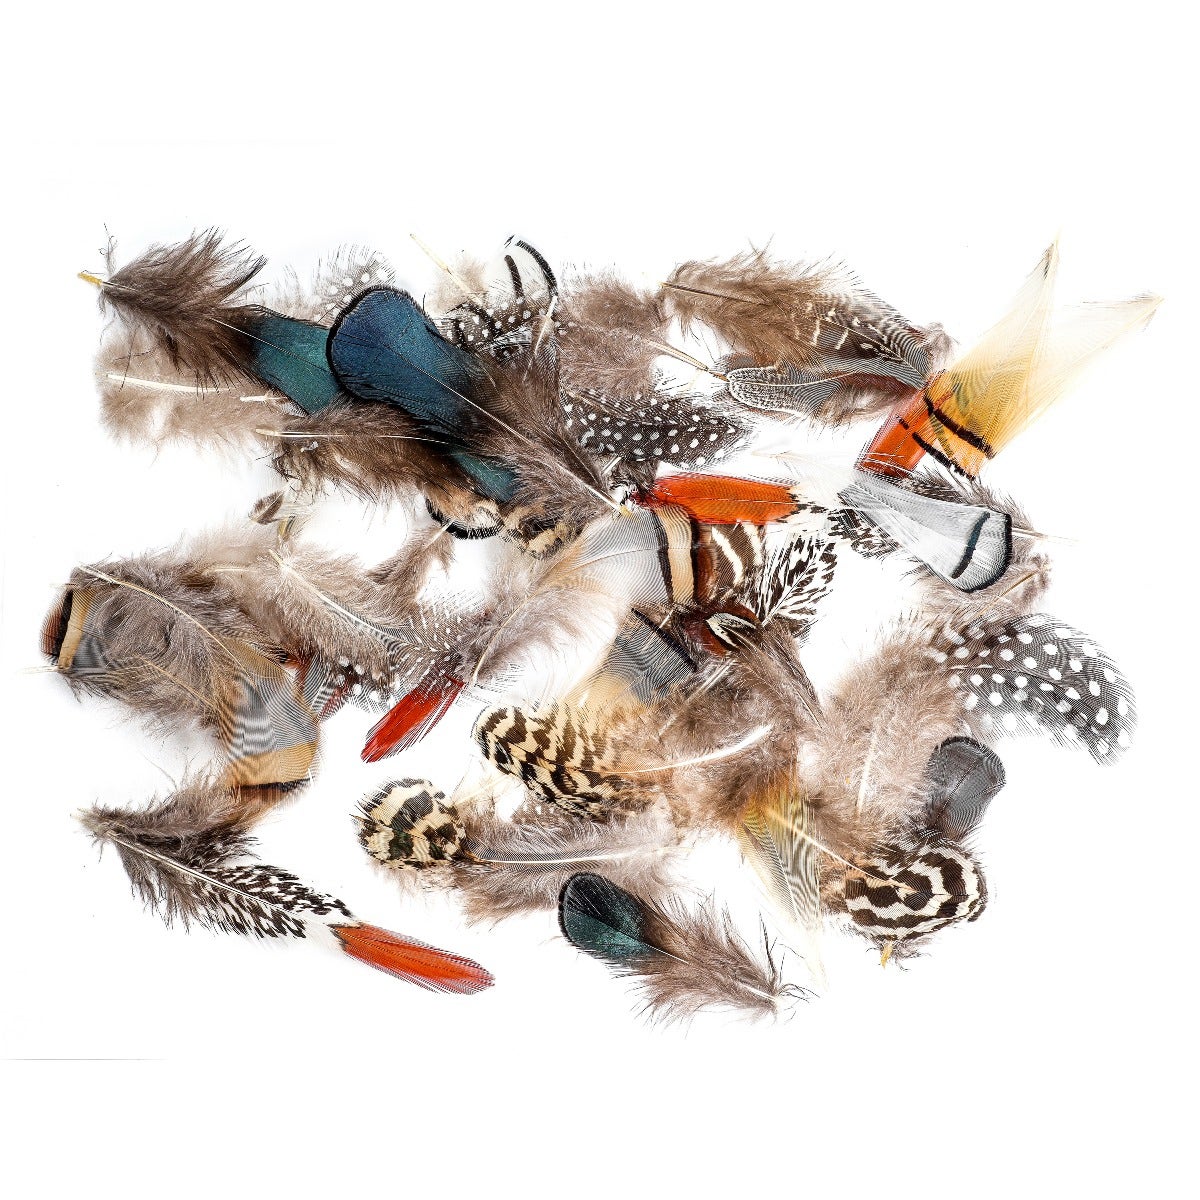 Yellow Feathers – Zucker Feather Products, Inc.